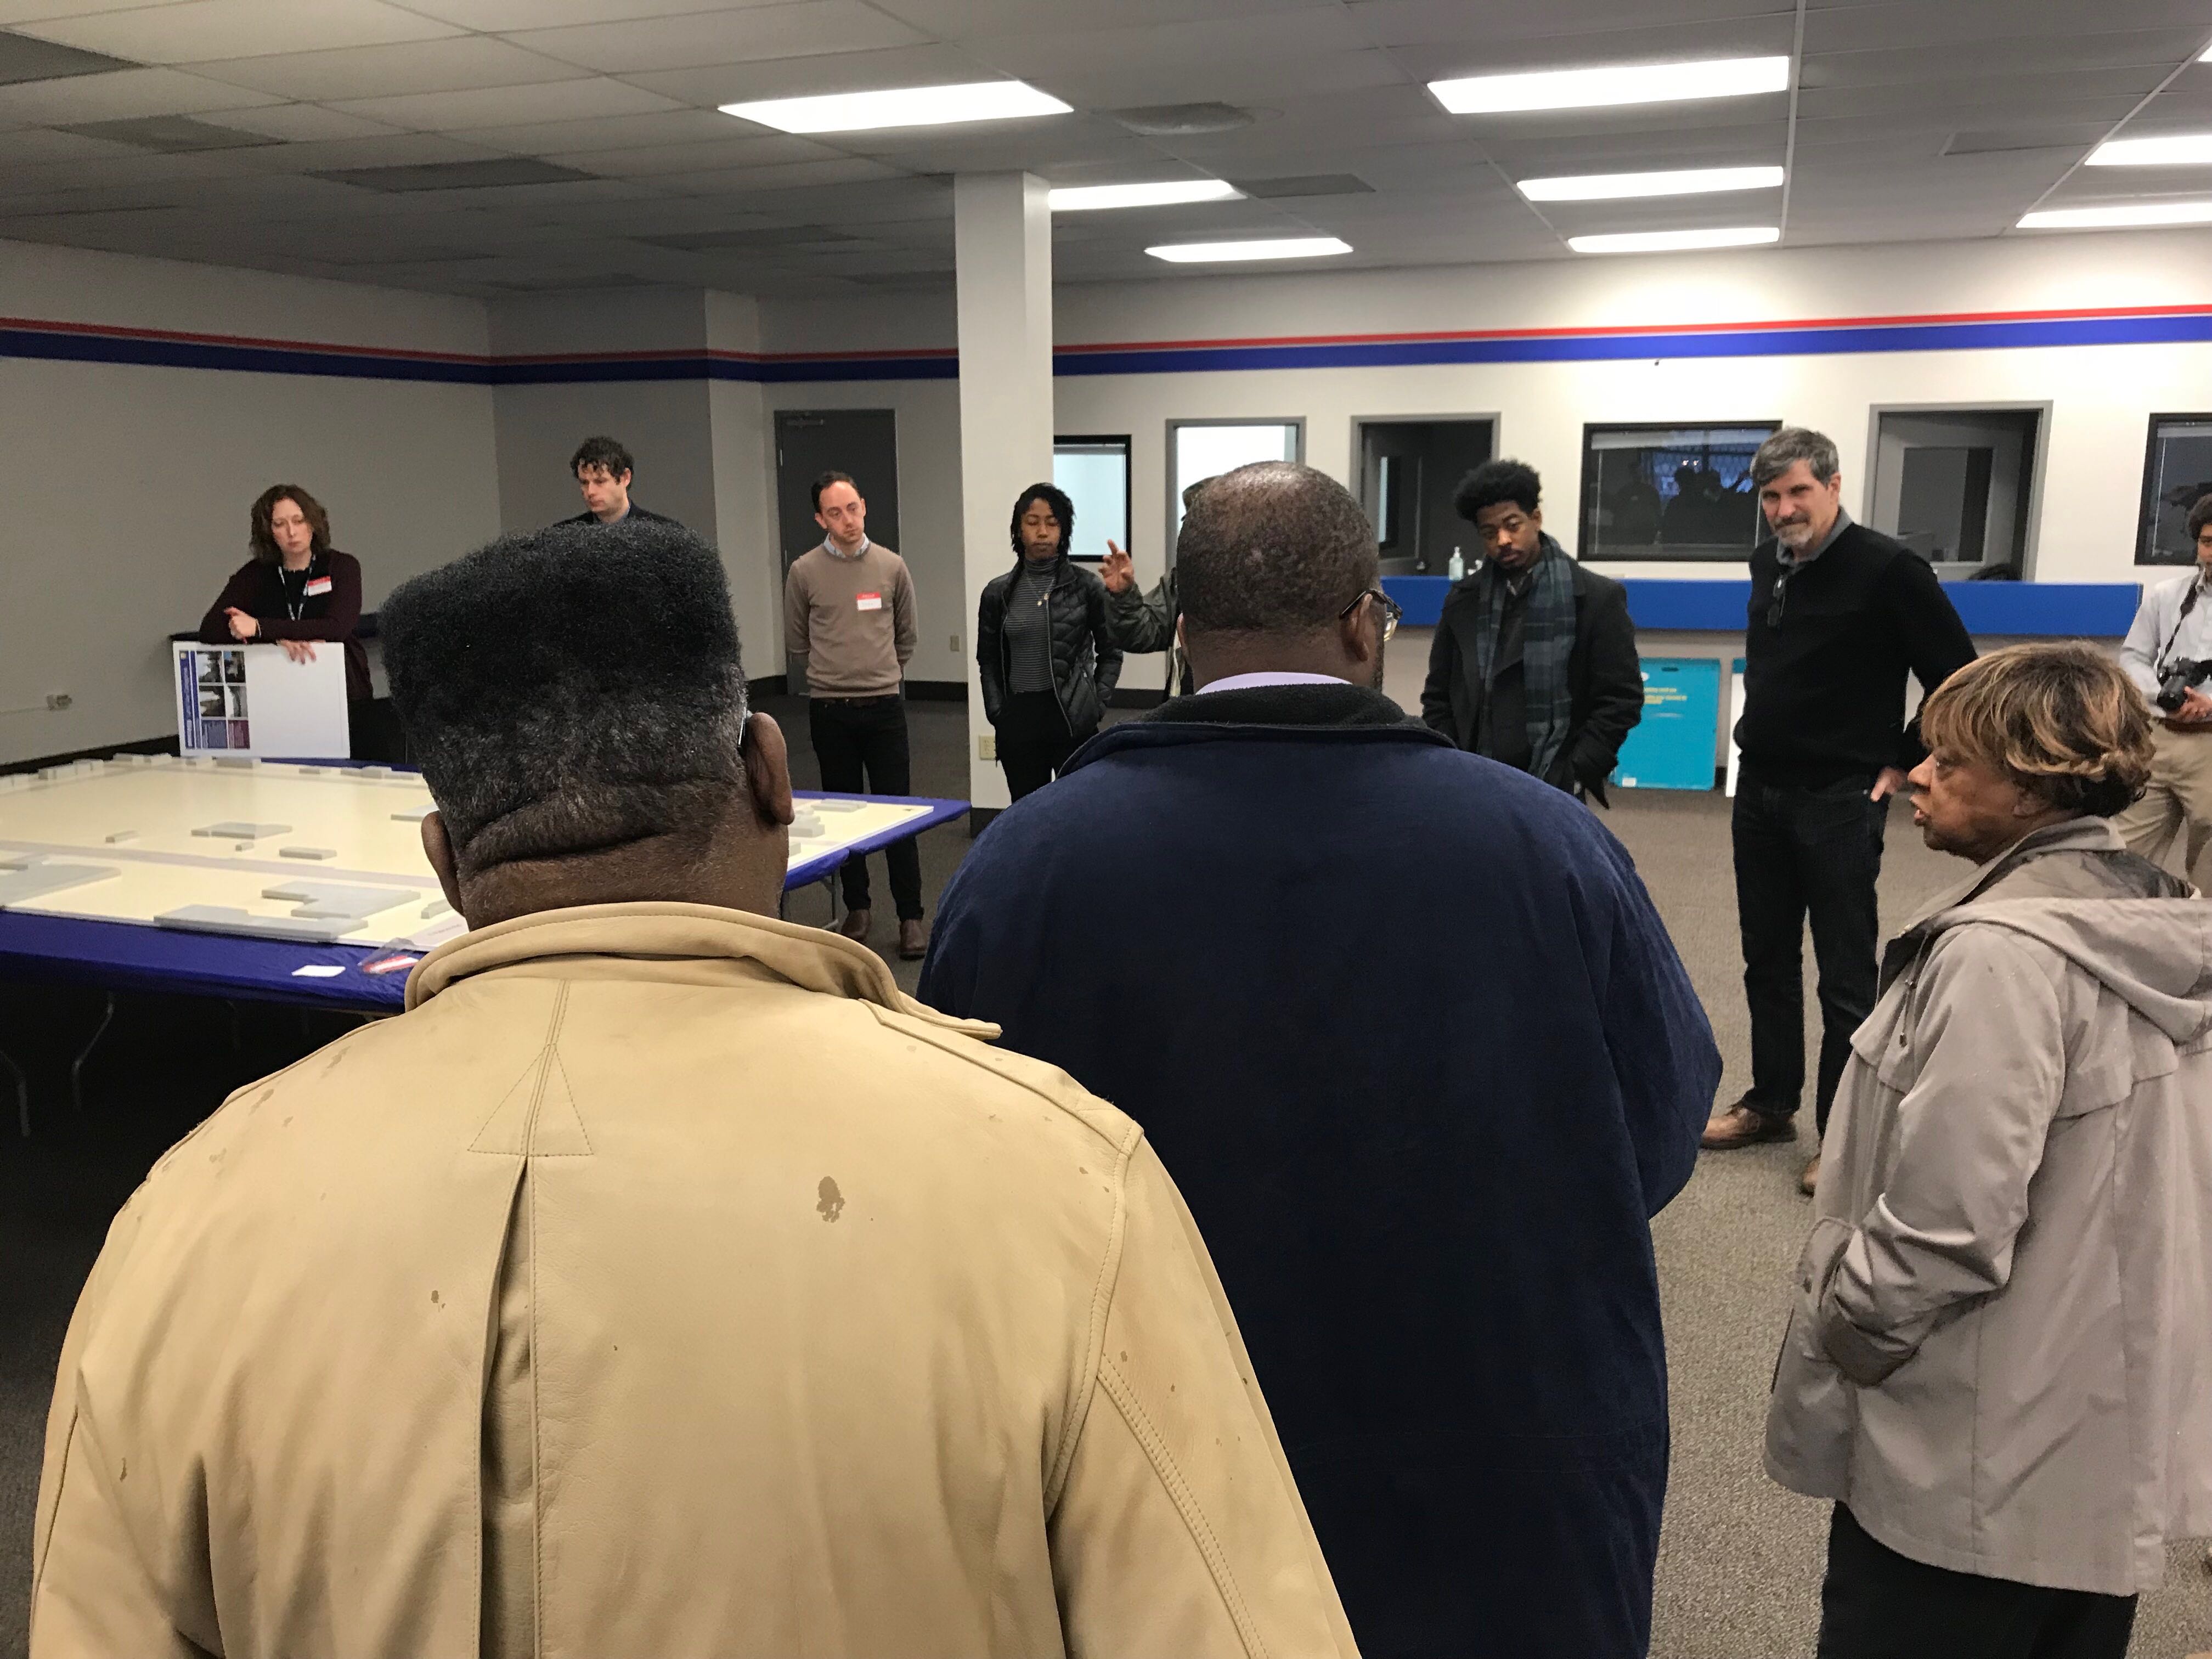 Stakeholders gather for the kickoff of the Whitehaven Plaza design charrette on January 23. Community leader Hazel Moore (far left) shares her thoughts. (Cole Bradley)